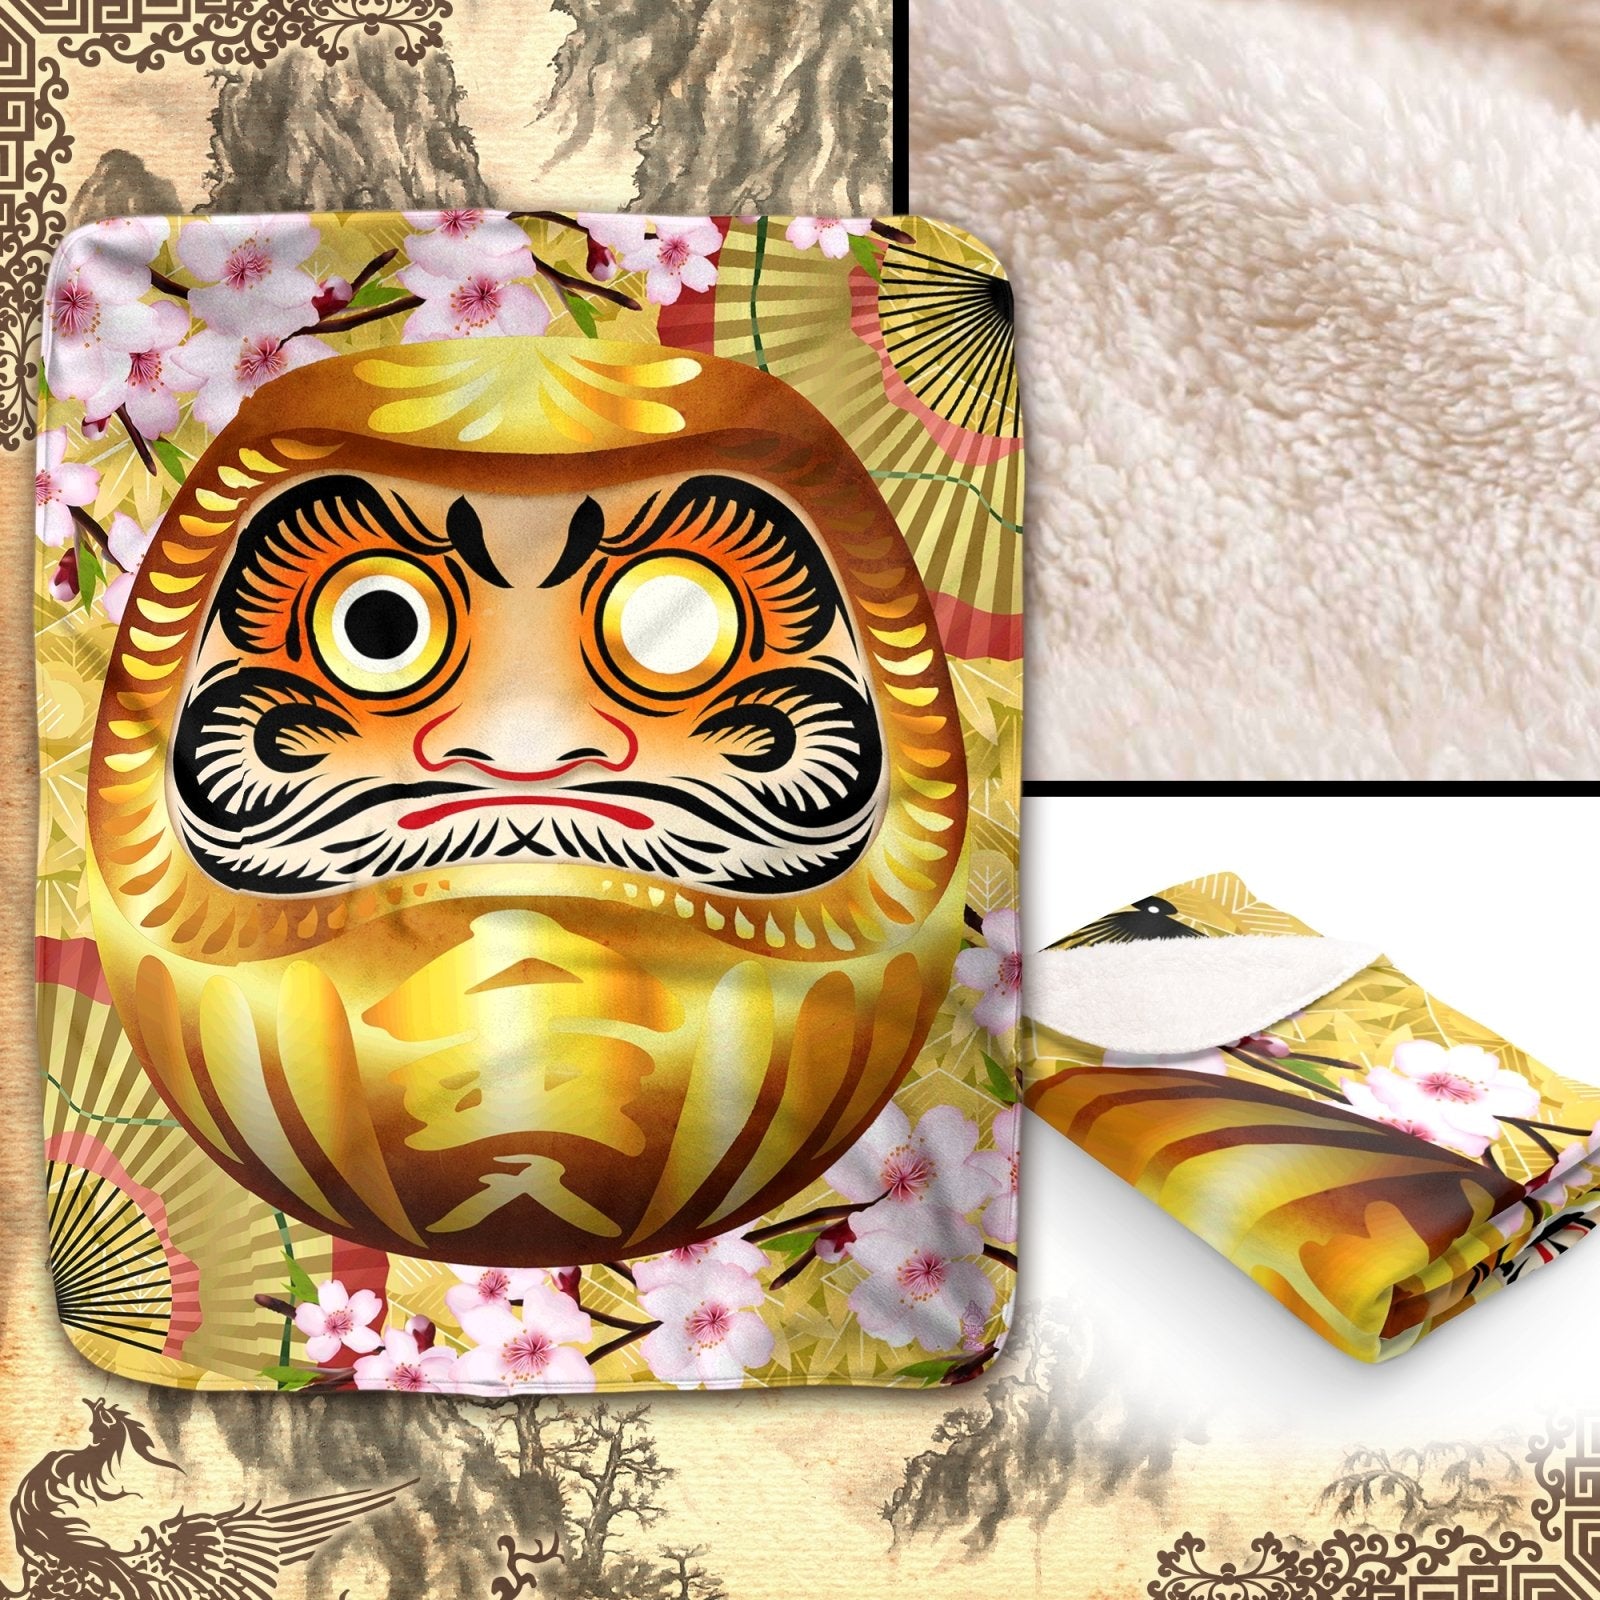 Daruma Throw Fleece Blanket, Japanese Anime and Manga, Indie and Ecclectic Decor, Eclectic and Funky Gift - Gold - Abysm Internal